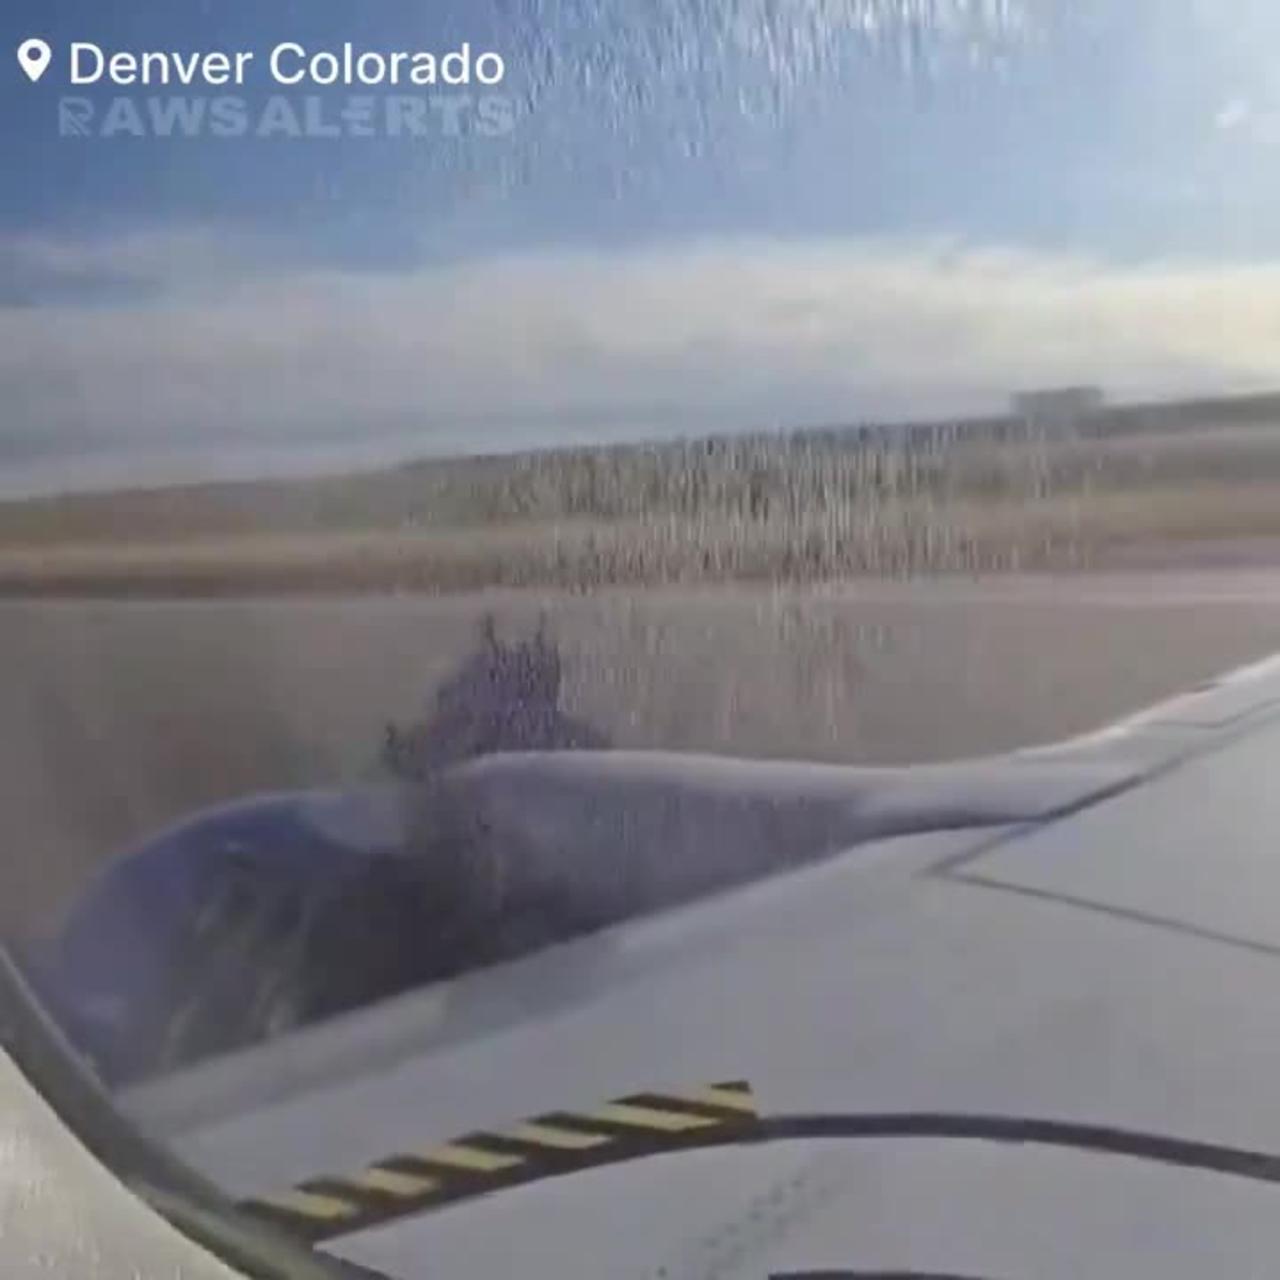 Southwest Airlines Boeing 737 forced to make emergency - Engine cowling came loose